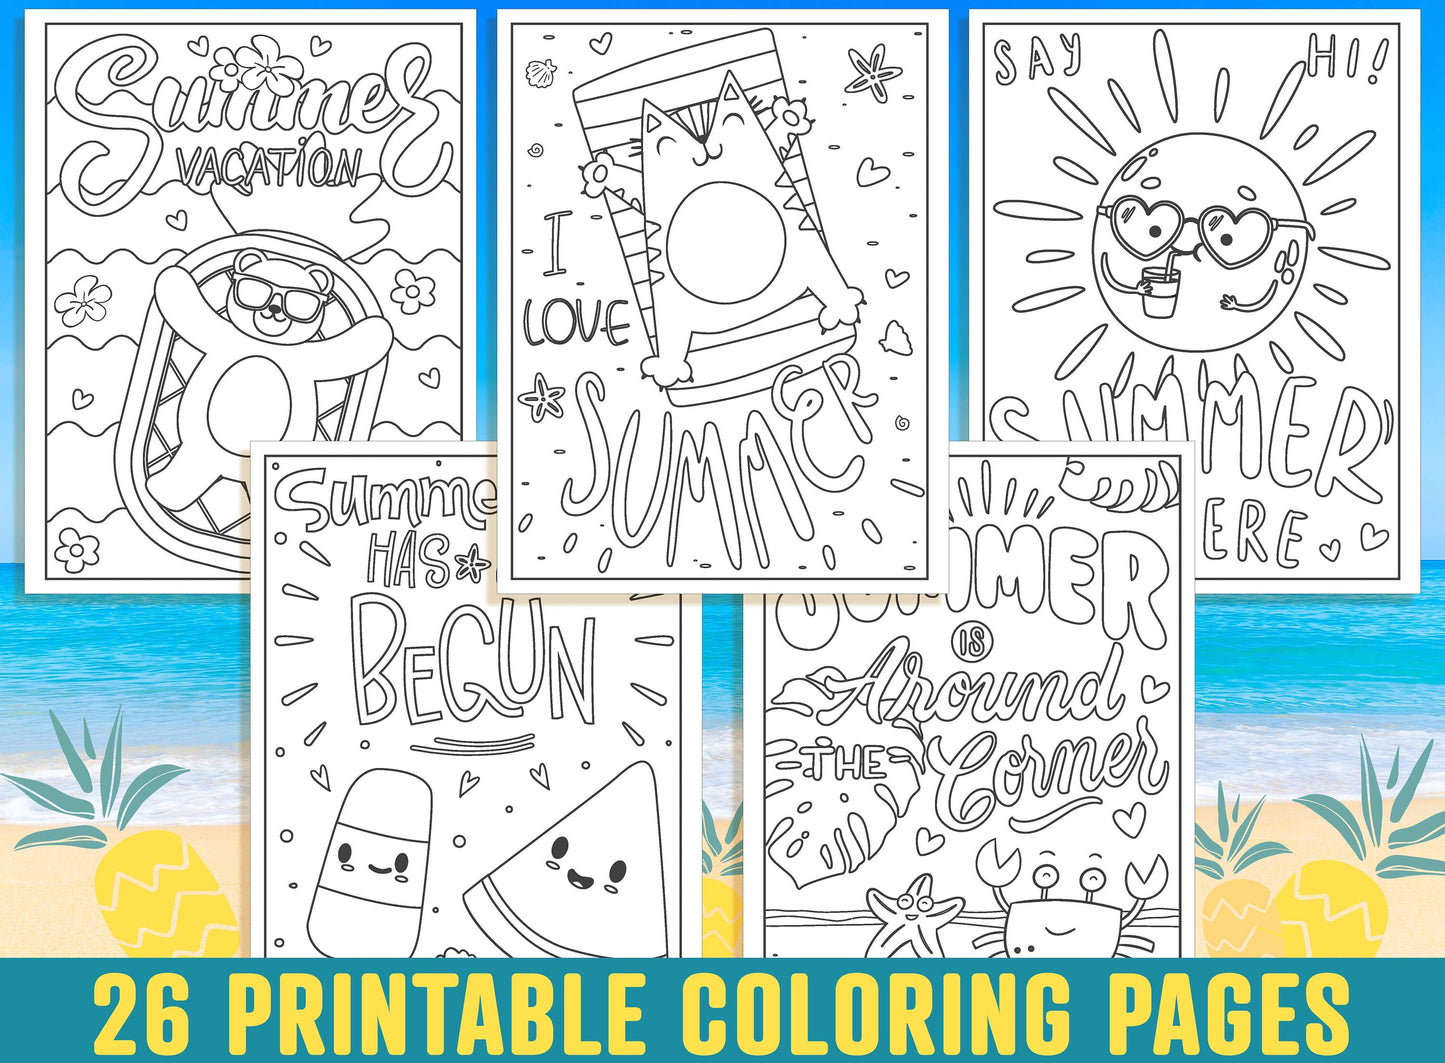 Summer Coloring Pages, 26 Printable Summer Holiday Coloring Pages for Kids, Boys, Girls, Teens, Adults, Summer Activities, Fun Coloring Book